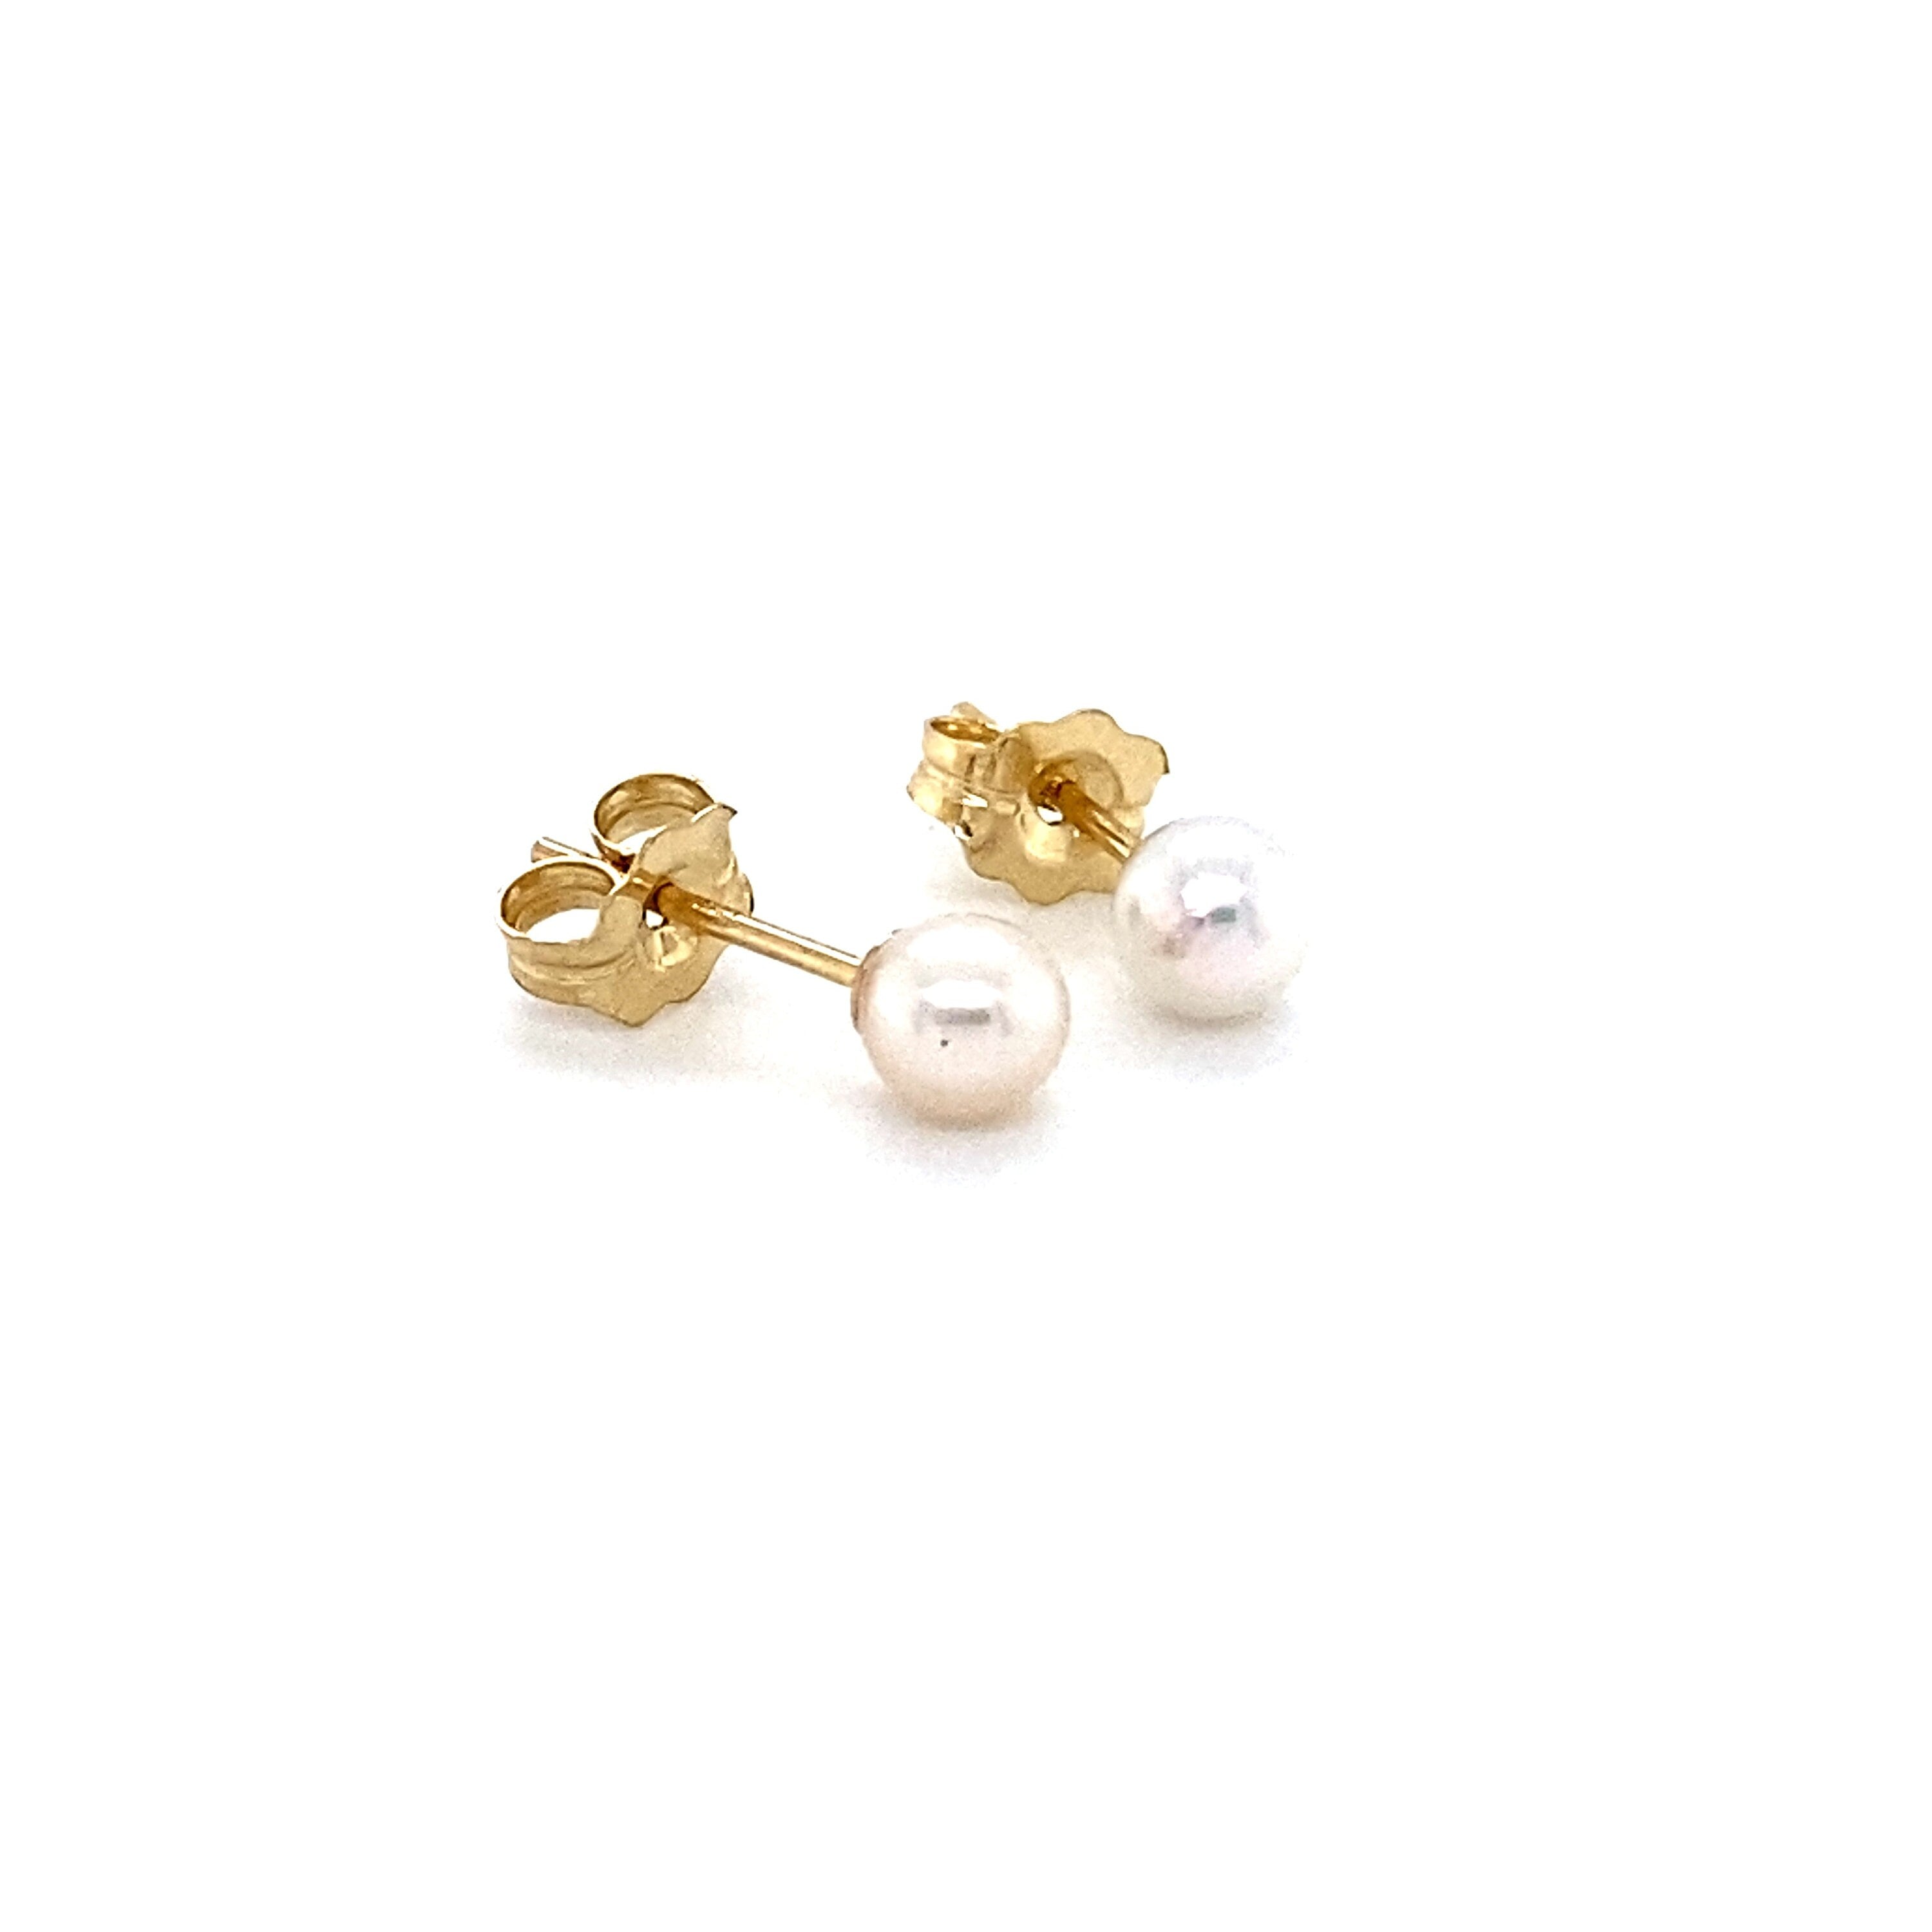 Classic Akoya Pearl Stud Earrings with Solid 14K Yellow Gold Post and Back, 4mm.